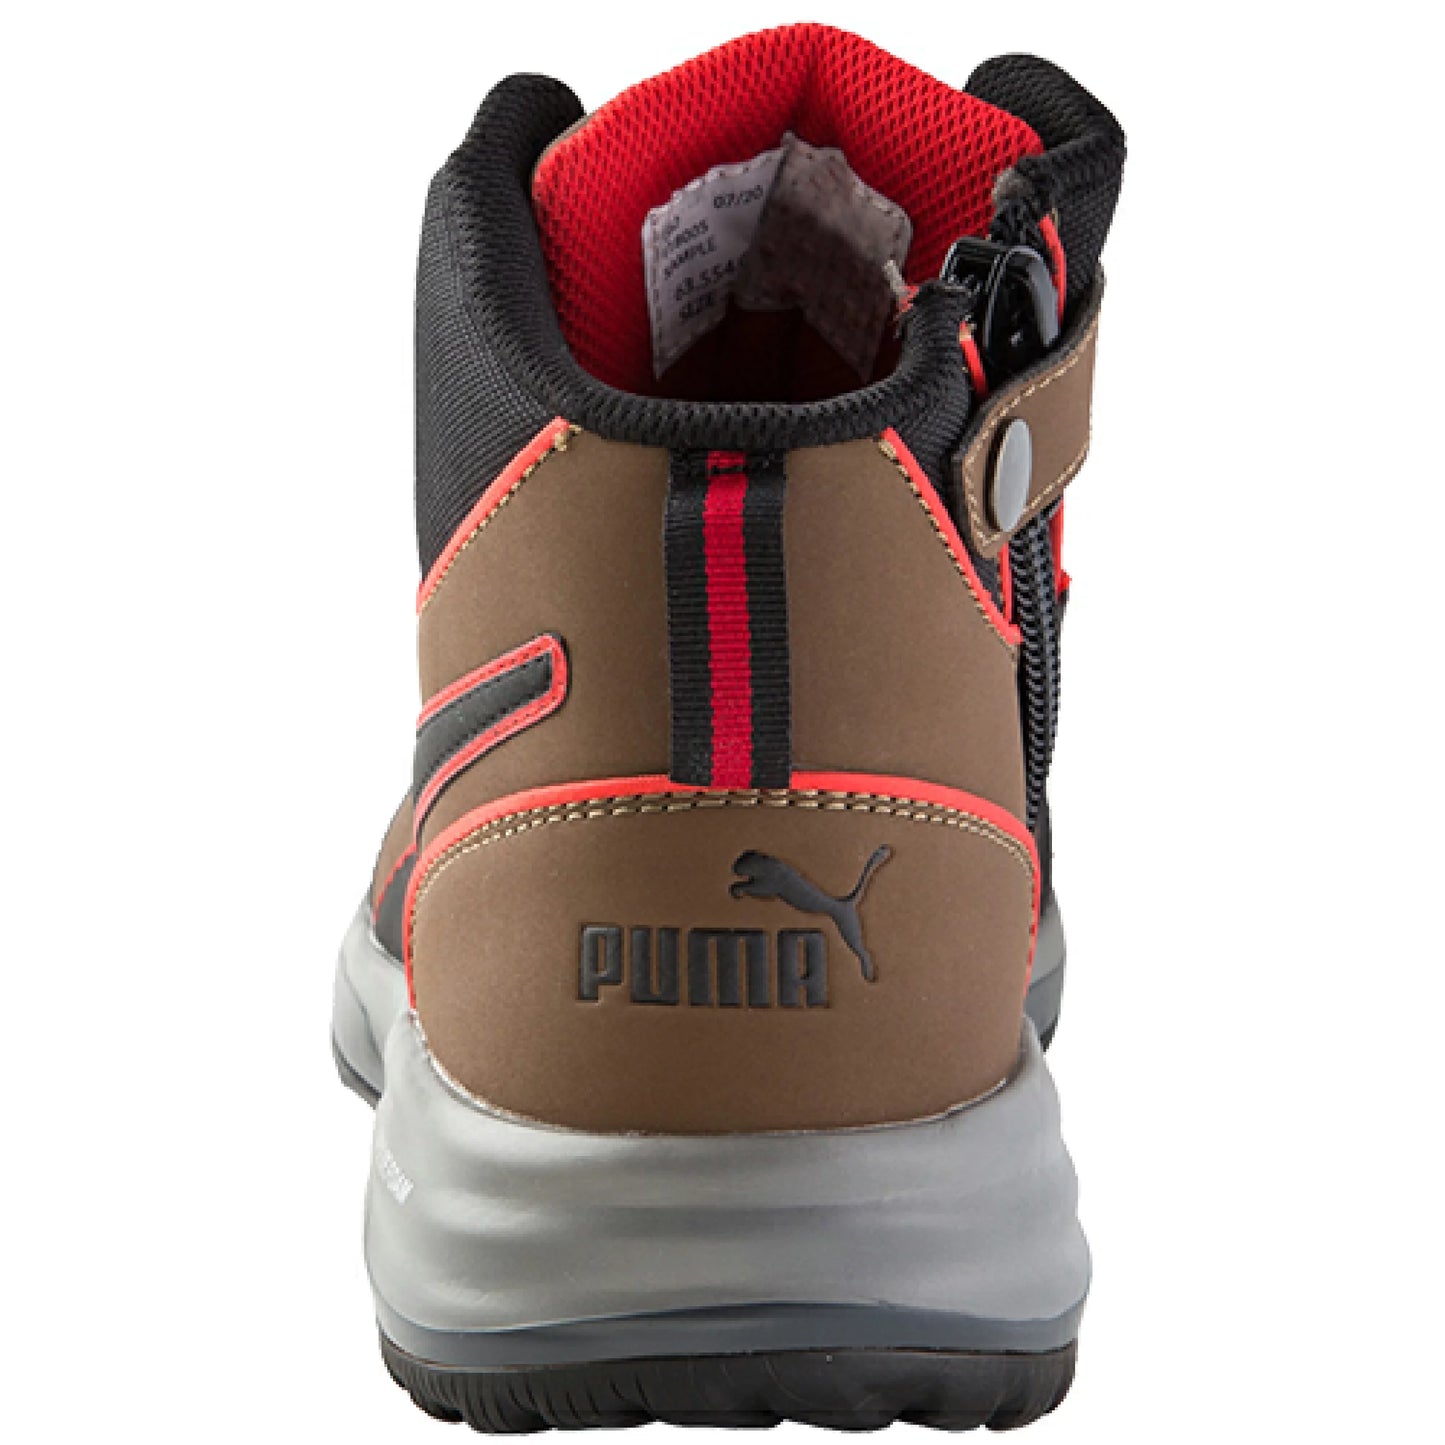 Japan [Ready stock▪️Ready to ship] Puma brown water-splashing and heat-resistant high-top hiking work safety shoes 25cm US7 EU40